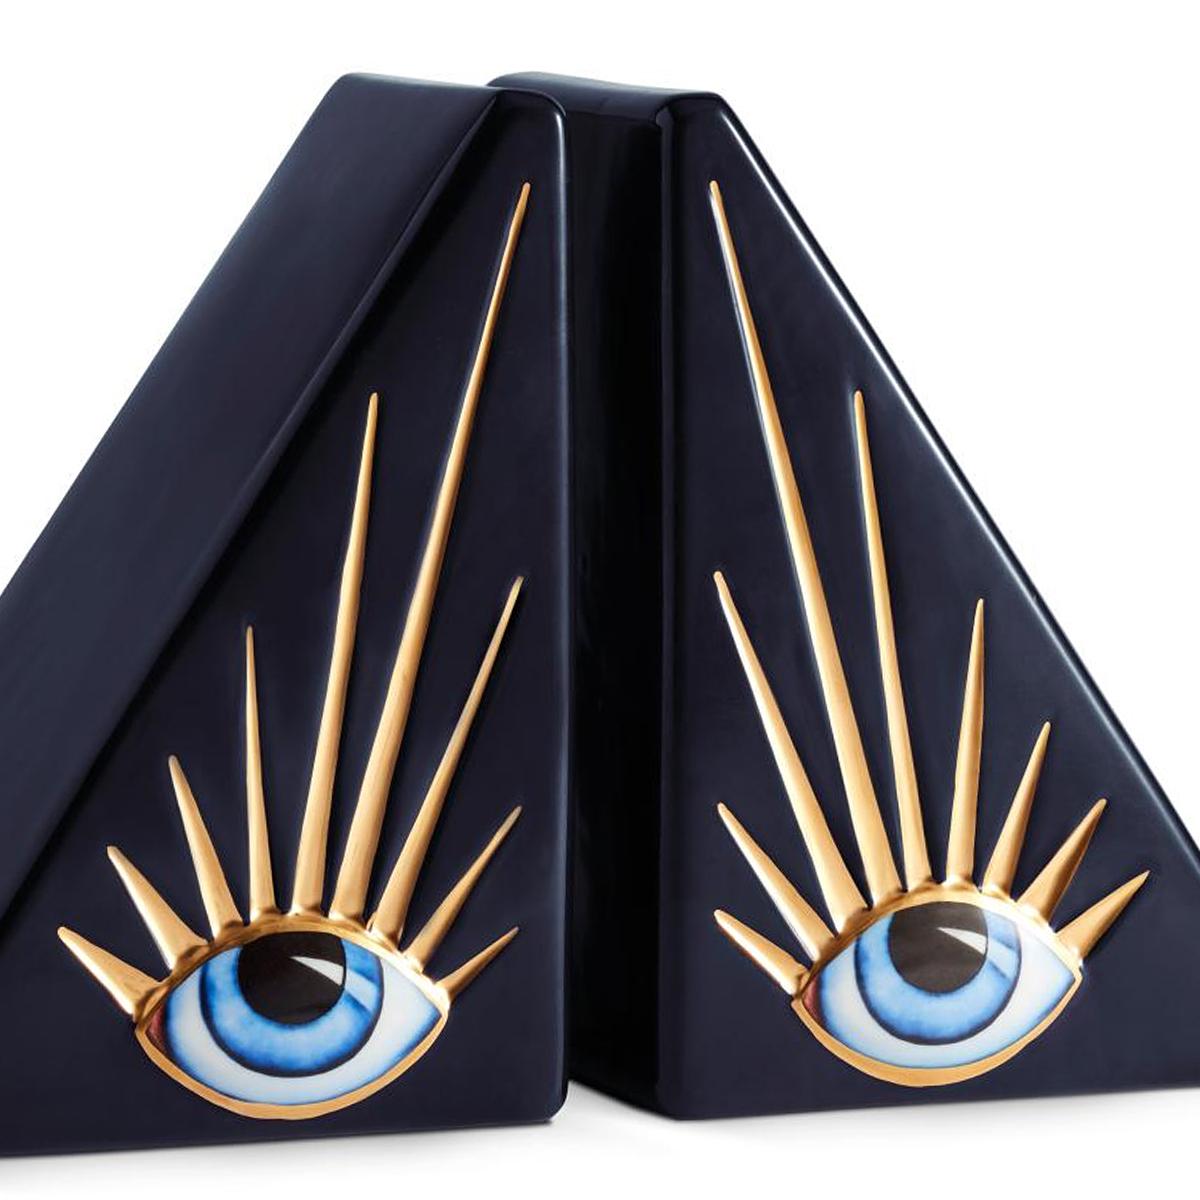 Portuguese Blue Eyes Set of 2 Bookends For Sale